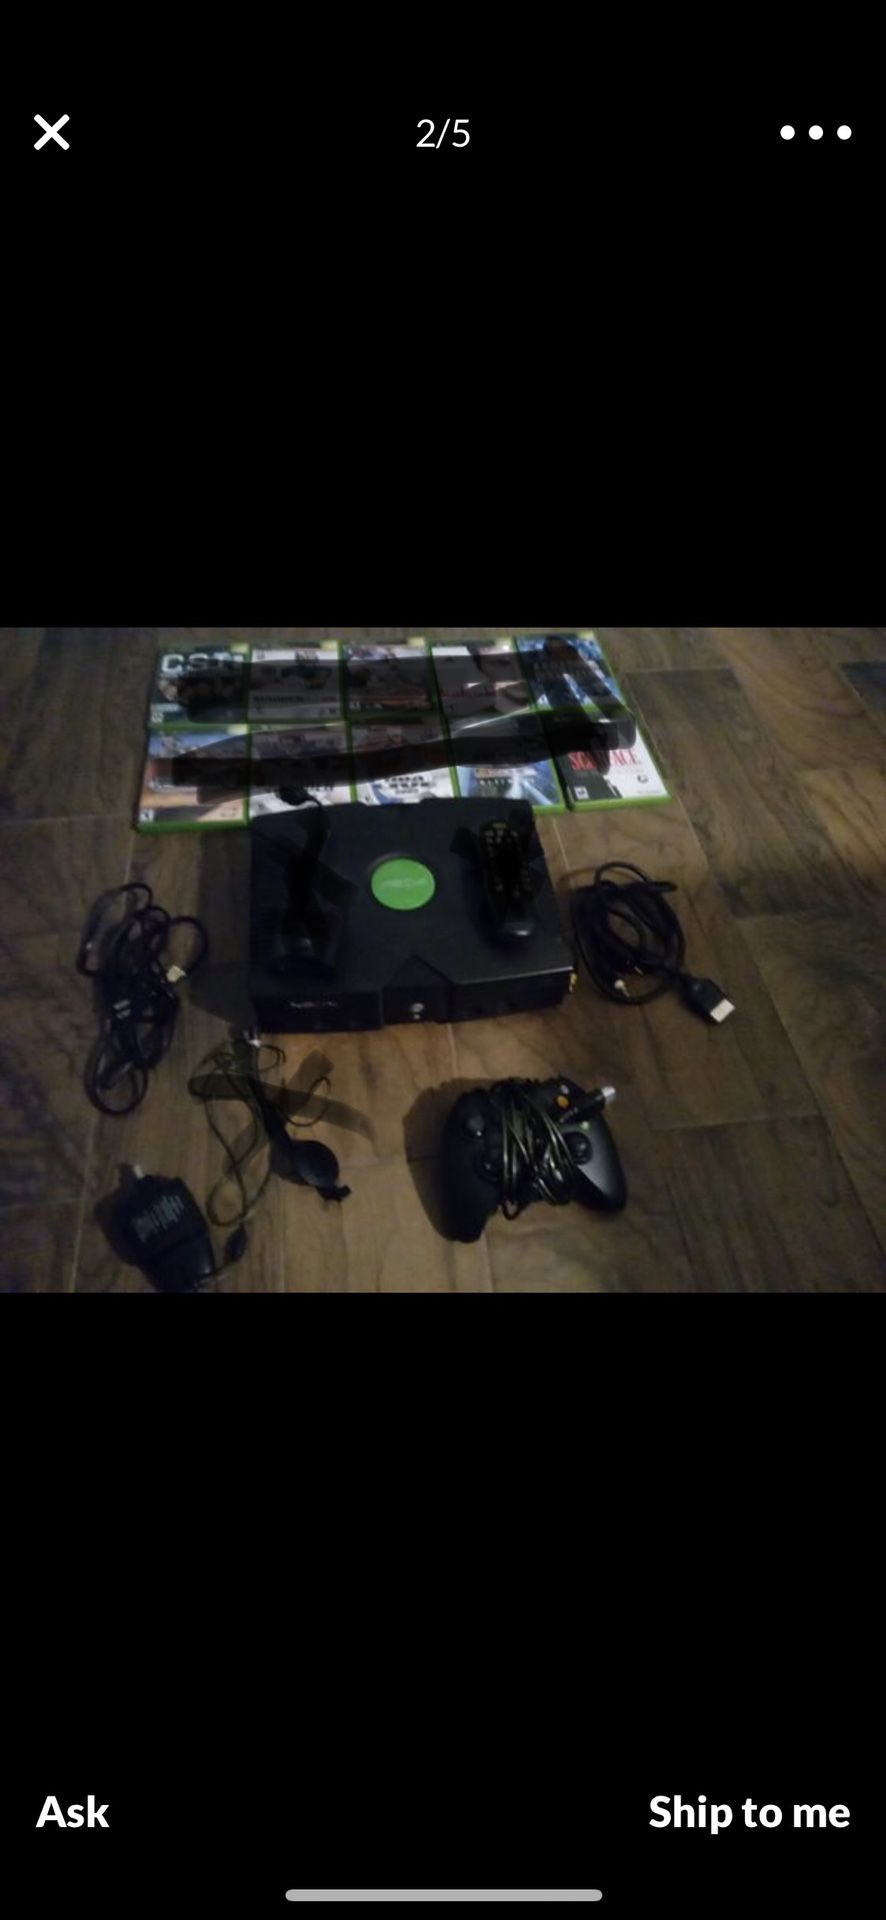 original Xbox perfect condition with 2 controllers and 2 games and Xbox 360 also